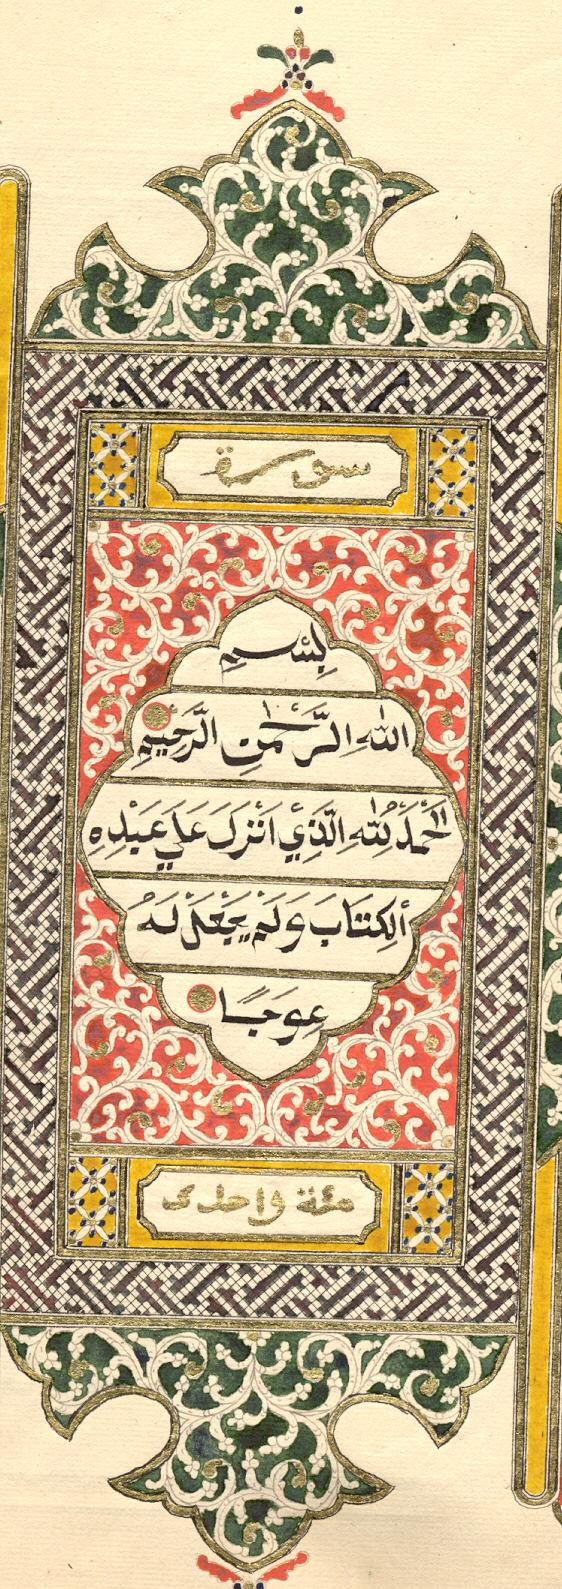 Illuminated Qur an, from South-East Asia, not dated, but 19th century, assumed so because of provenance history as it was once owned by the Dutch orientalist Taco Roorda (d. 1874).